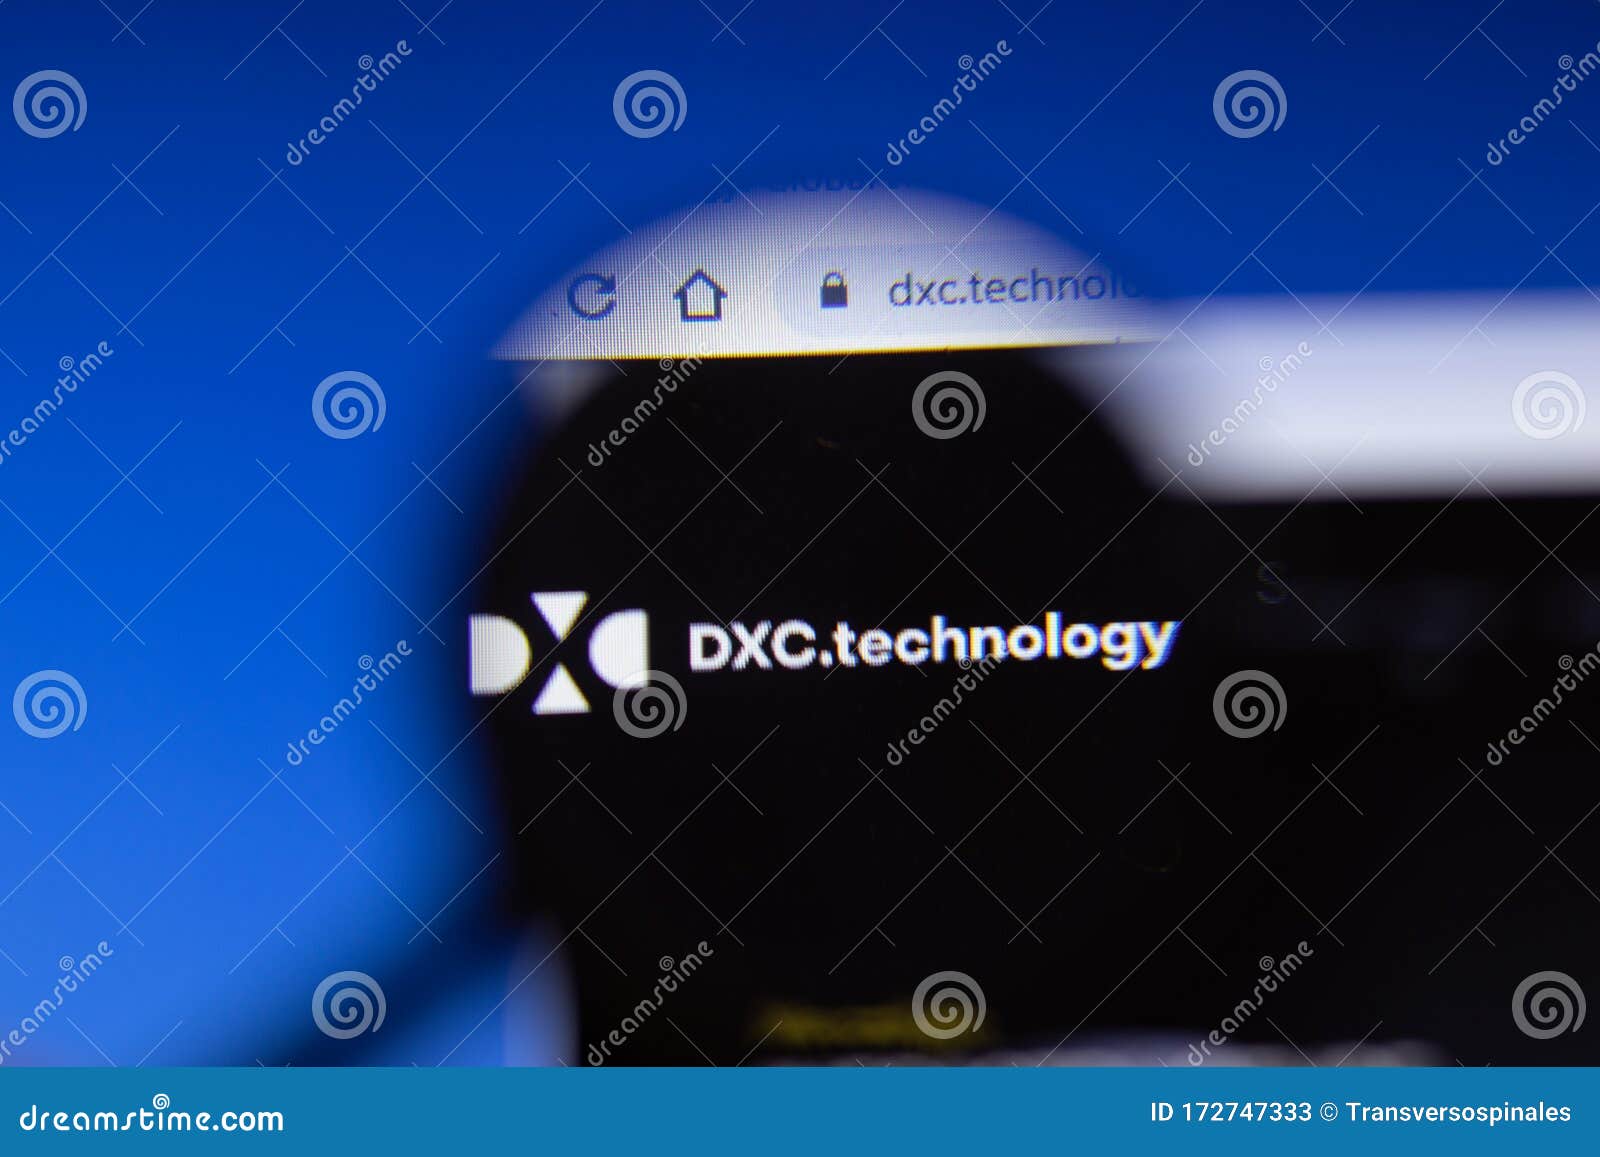 Saint-Petersburg, Russia - 18 February 2020: DXC Technology Company Website  Page Logo on Laptop Display. Screen with Icon, Editorial Stock Photo -  Image of communication, media: 172747333